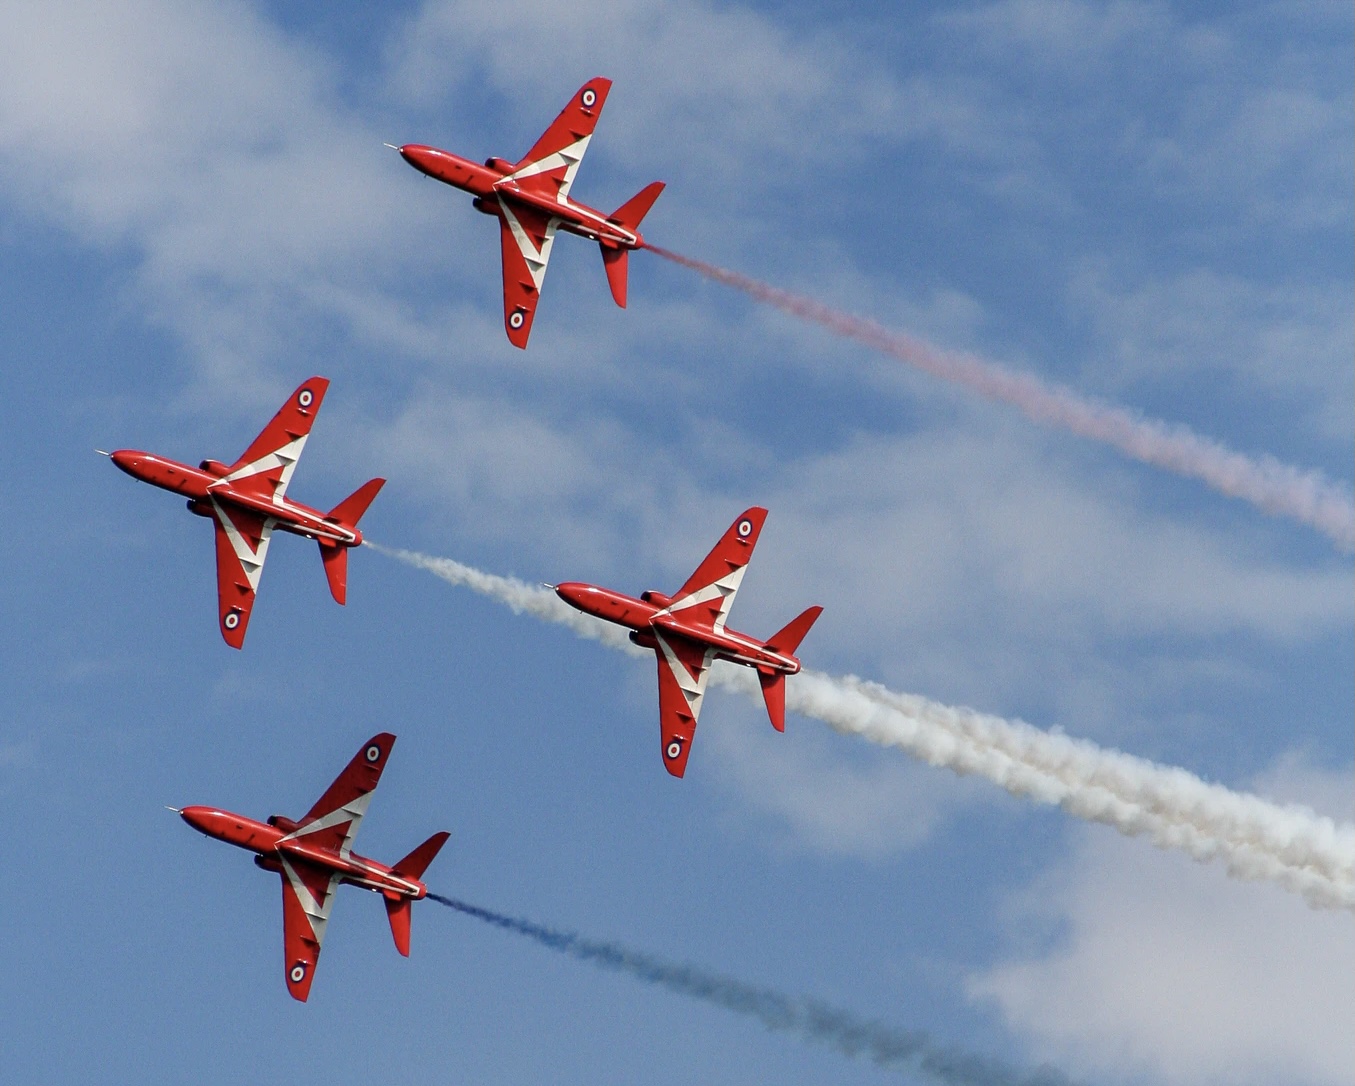 NEWS | The Red Arrows will fly over parts of Herefordshire on Thursday as part of the Midlands Air Festival